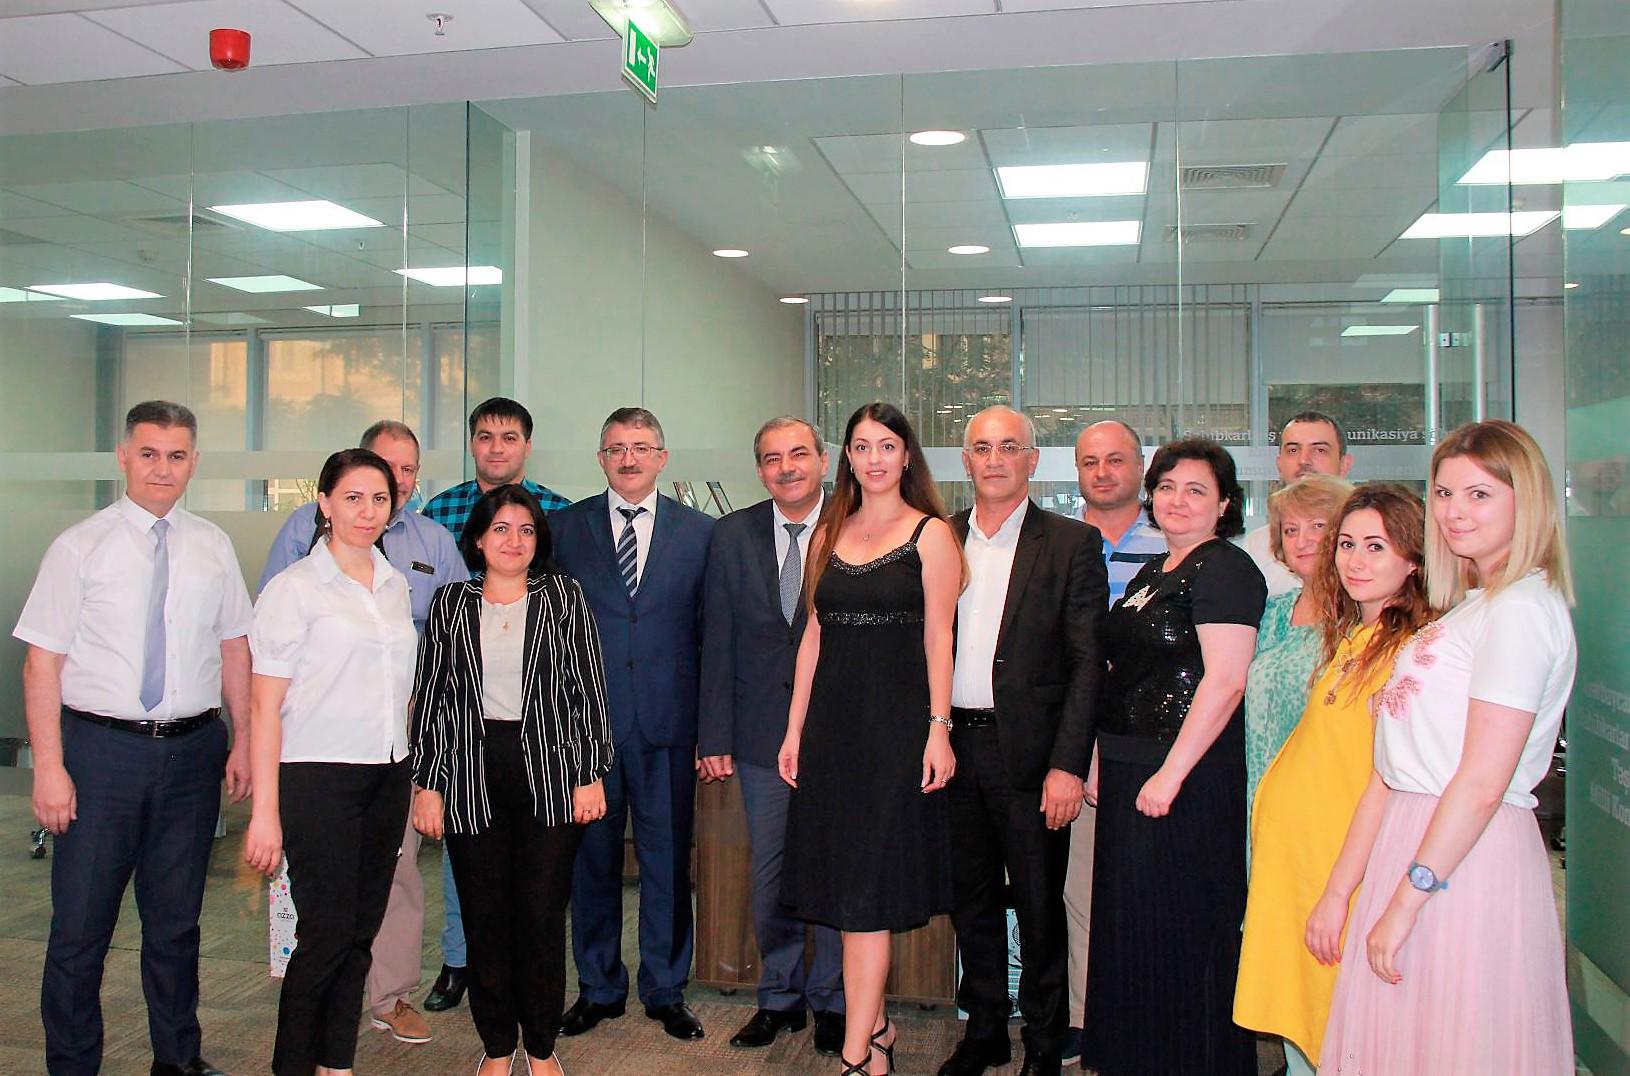 Russia’s North Ossetian entrepreneurs interested in co-op with Azerbaijan (PHOTO)